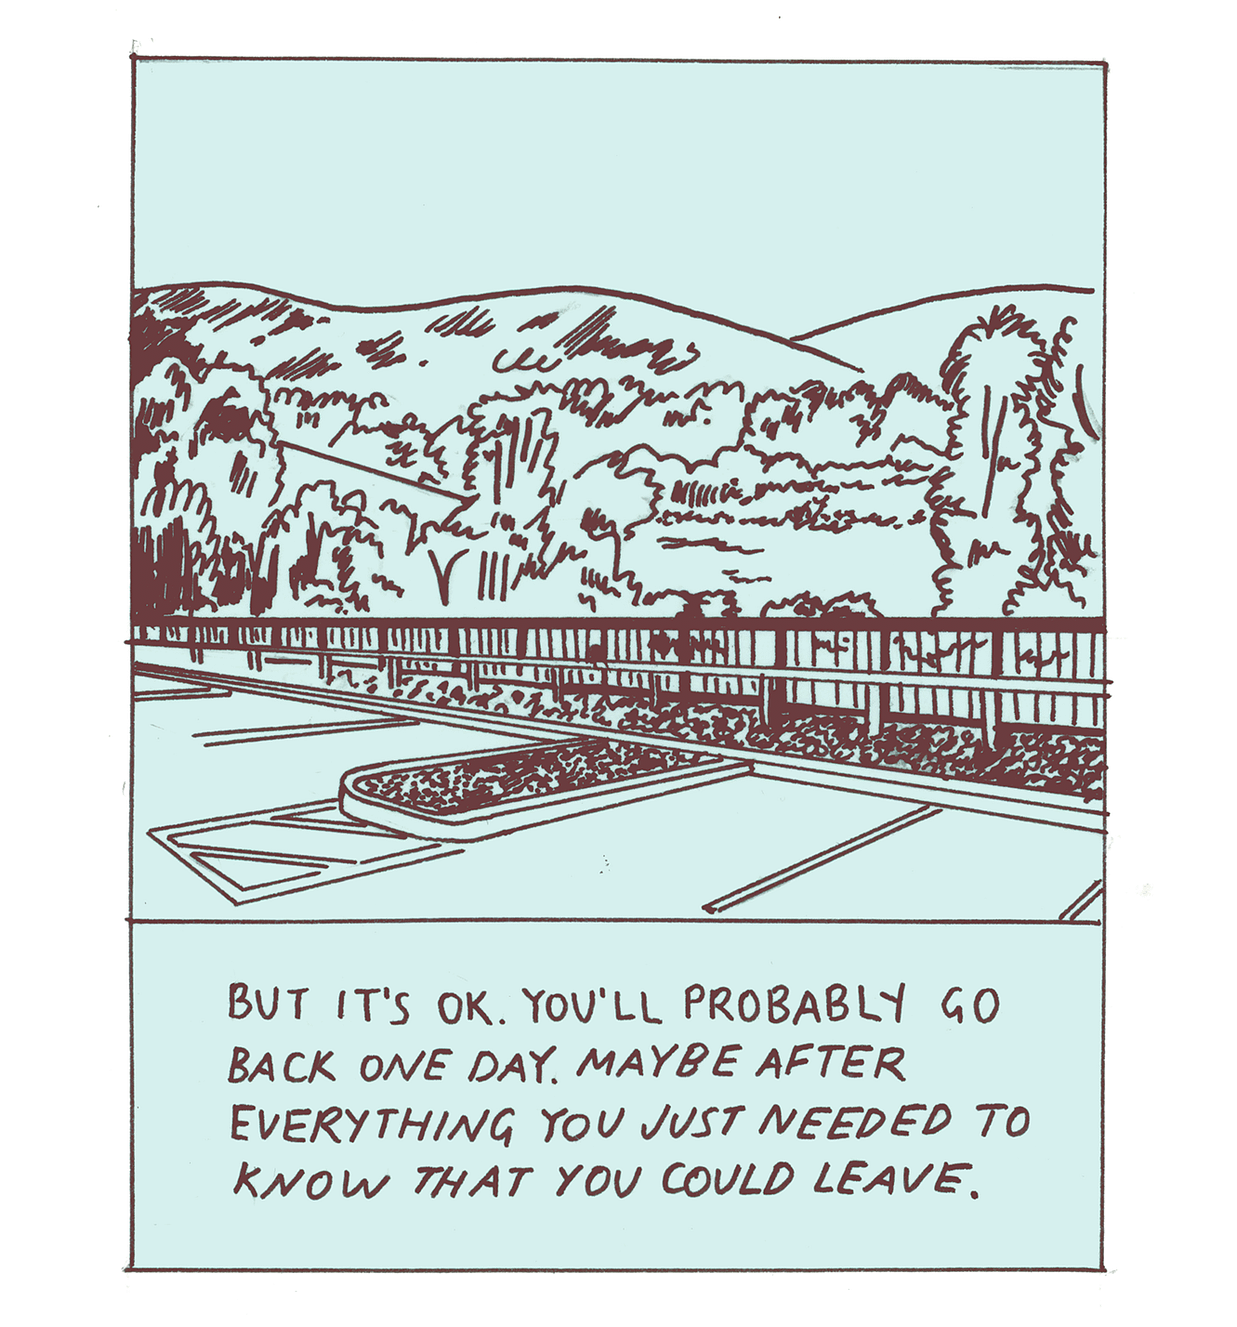 An image of tree-covered hills as seen from a parking lot. Some parking spaces are visible in the lower part of the frame, divided from the hills by a fence. The parking lot is empty and there are no figures in sight. The caption reads “But it’s OK. You’ll probably go back one day. Maybe after everything you just needed to know that you could leave.”